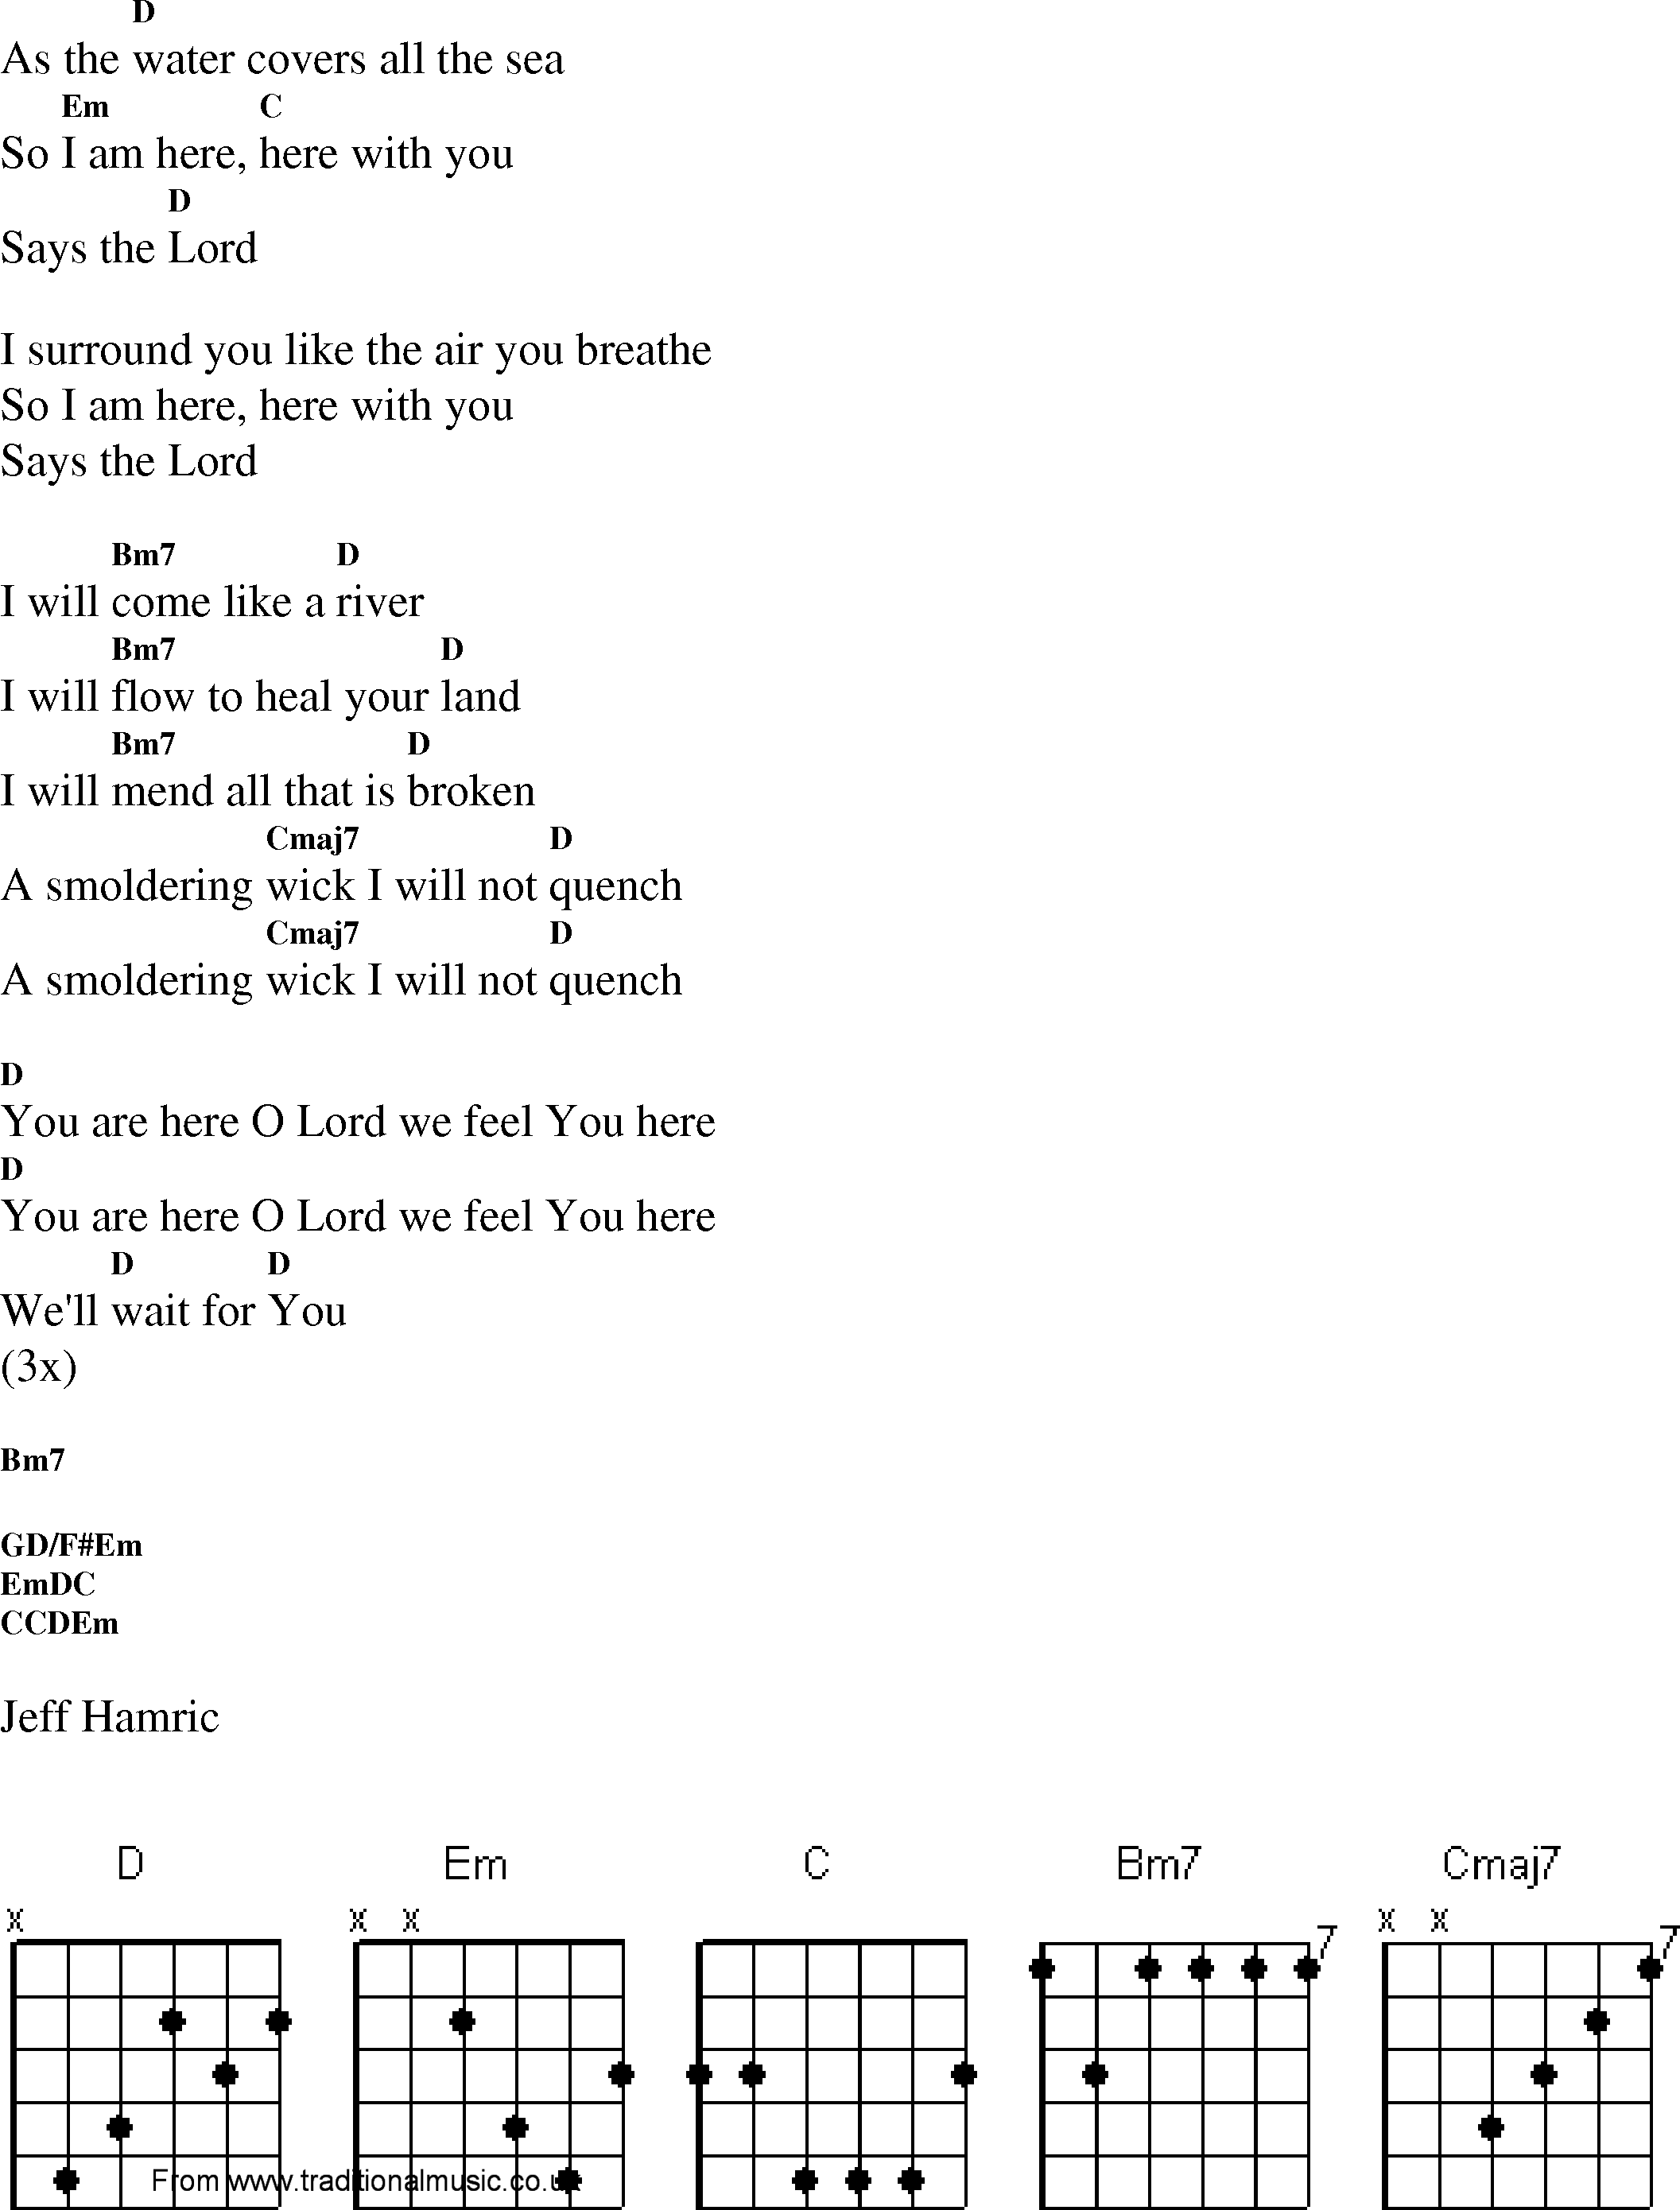 Gospel Song: i_will_come, lyrics and chords.